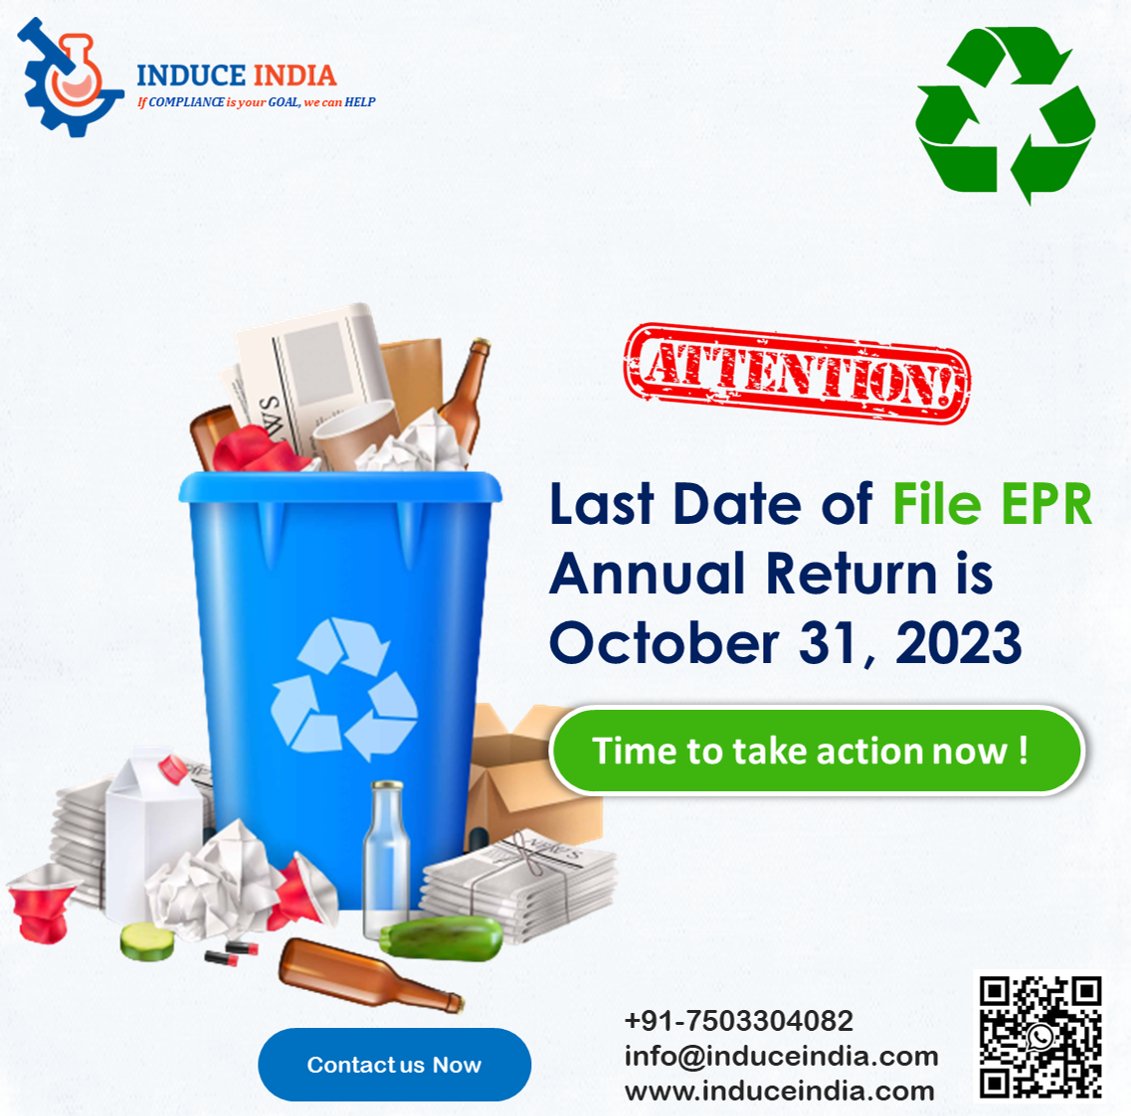 Ministry of #Environment, #Forest and #Climate Change (MoEFCC), Govt. of India notified an amendment to Plastic Waste Management (PWM) as per which the last of filing returns has been extended up to October 31, 2023.

#eprcertification #epr #plasticwaste #ewaste #SwachhBharat